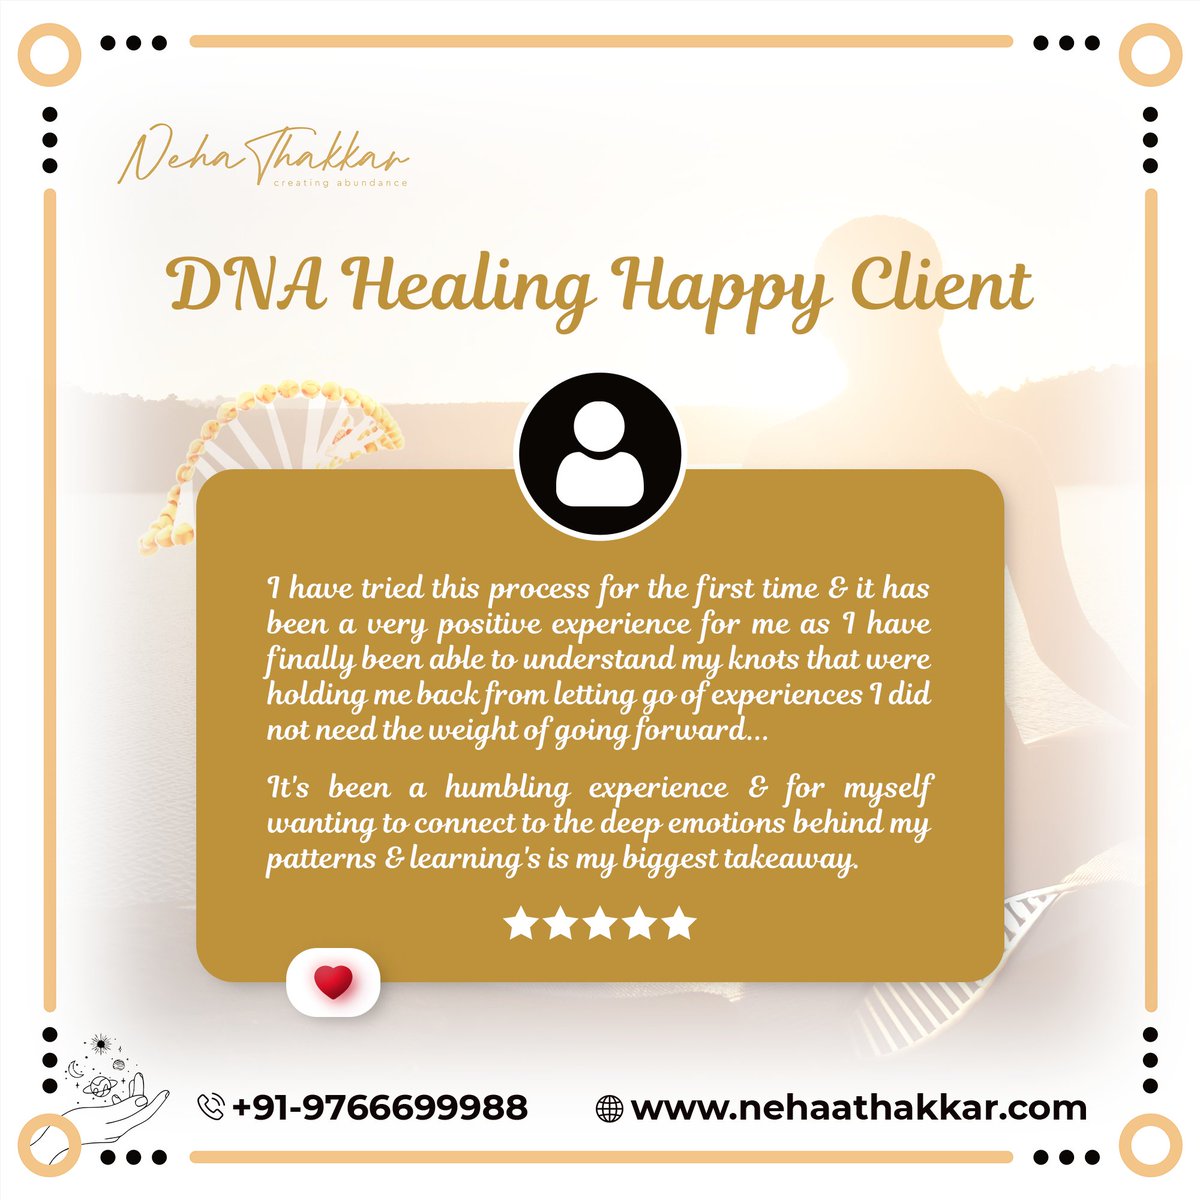 Unleashing the power within! 🌈 DNA healing has been a game-changer for me. Feeling more alive, balanced, and truly happy! Whatsapp group chat.whatsapp.com/HEiXrfoaHrg2pX… Instagram instagram.com/nehathakkar_cr… #DNAMagic #HappyClient #nehathakkar #DNAHealing #HappyClientJourney